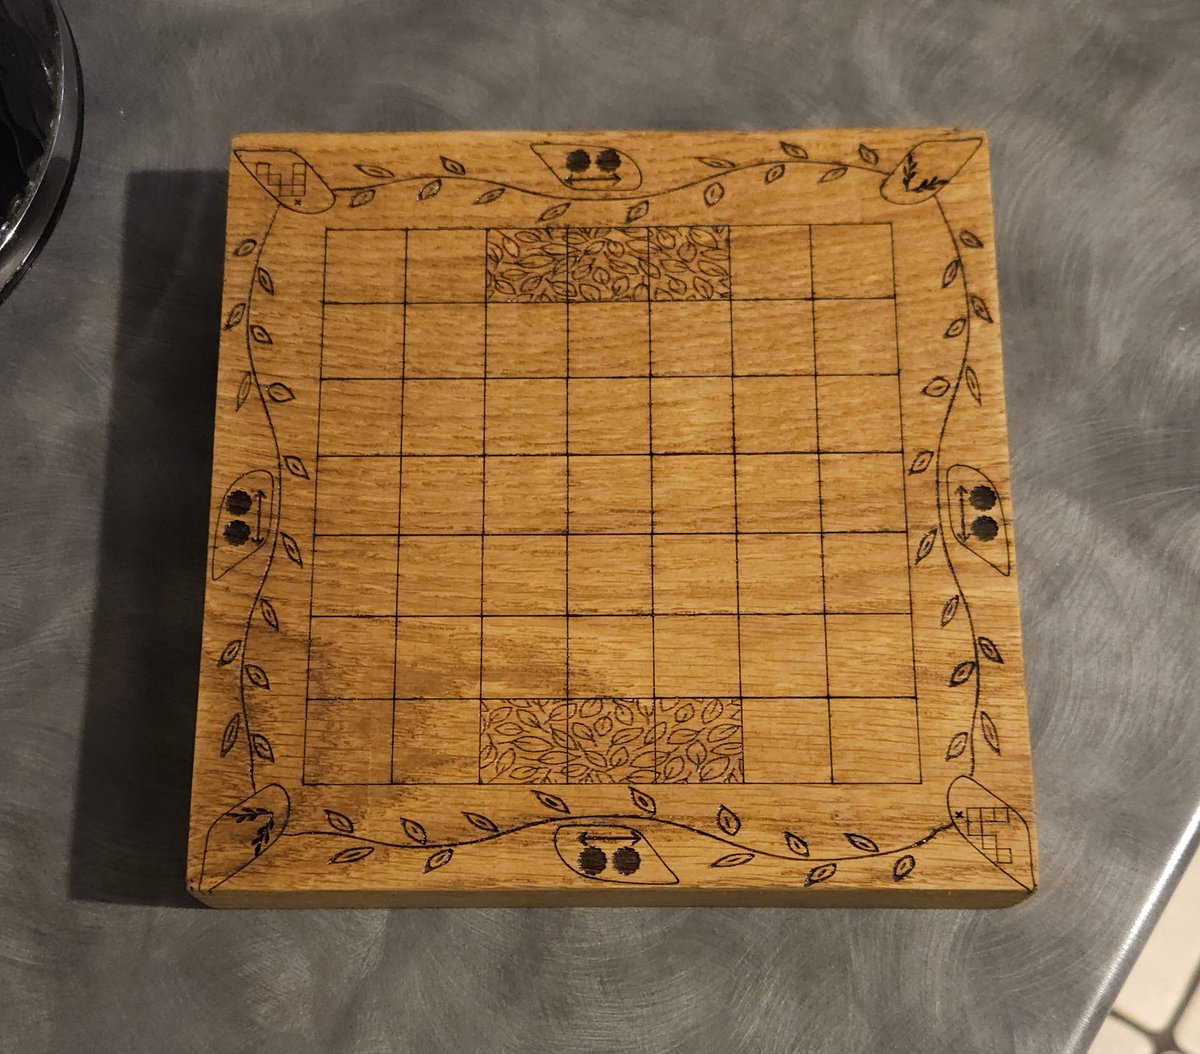 From prototype to almost finished project. We've been working hard on this game. The final board is varnished Oak. All made in the UK called Overgrowth an abstract 2 player game of spreading across a meadow. Who would like to give it a try?